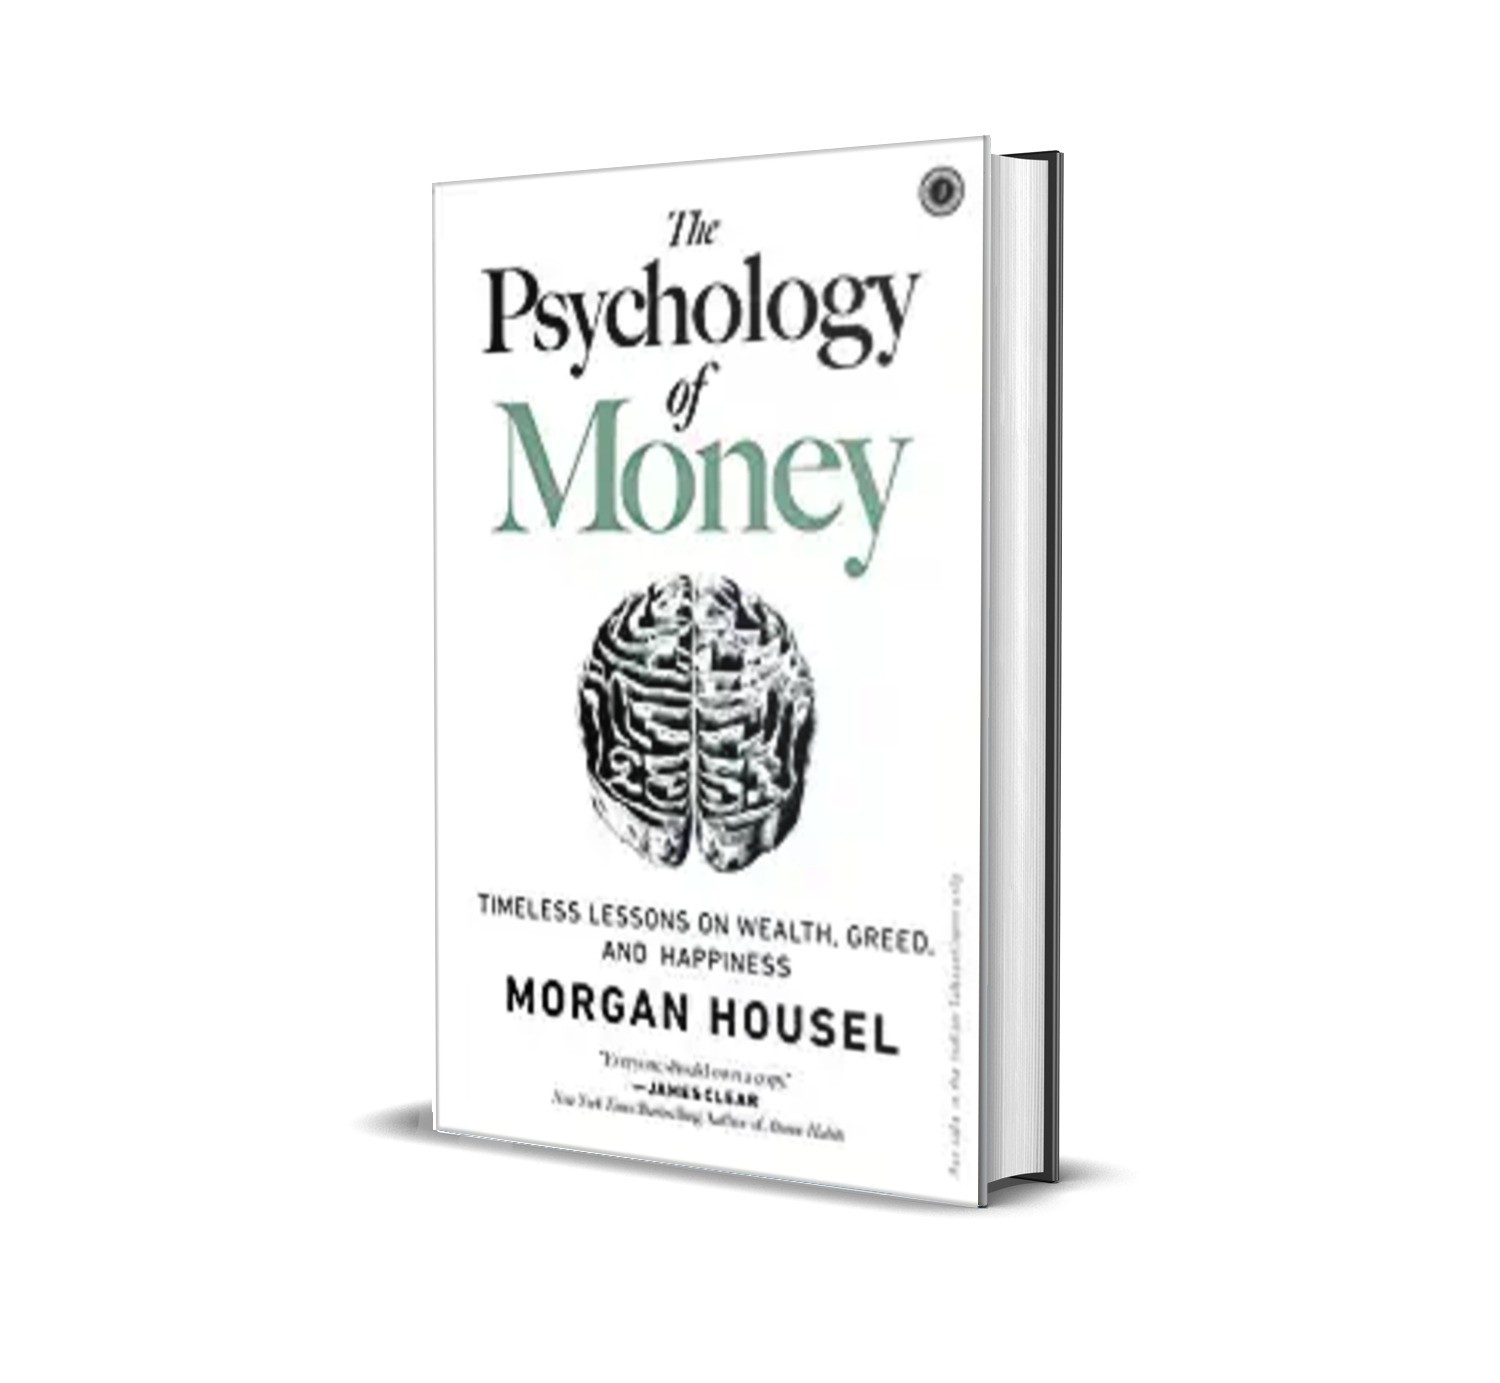 The Psychology of Money by Morgan Housel - Bookmark and World